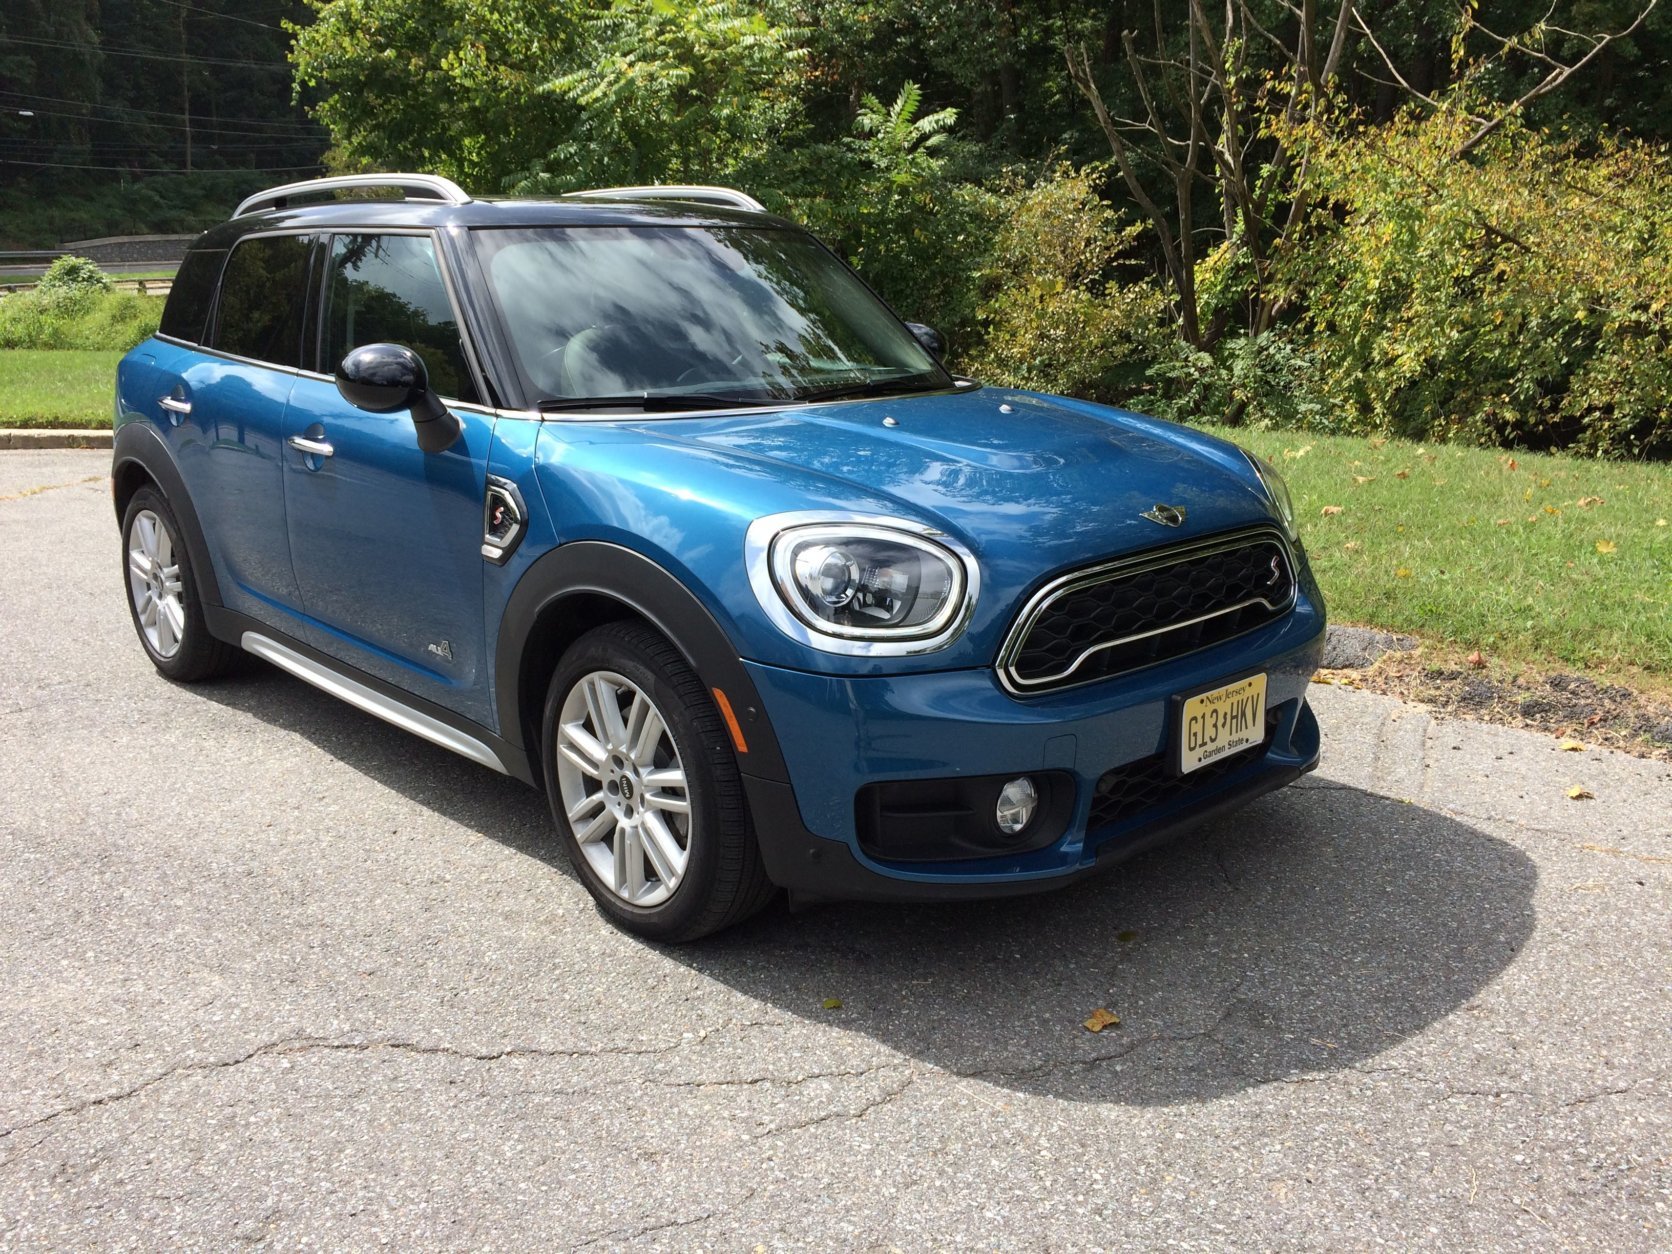 Car guy Mike Parris says the Mini Cooper S Countryman All4 is a refined yet pricey small crossover with a special vibe. (WTOP/Mike Parris)